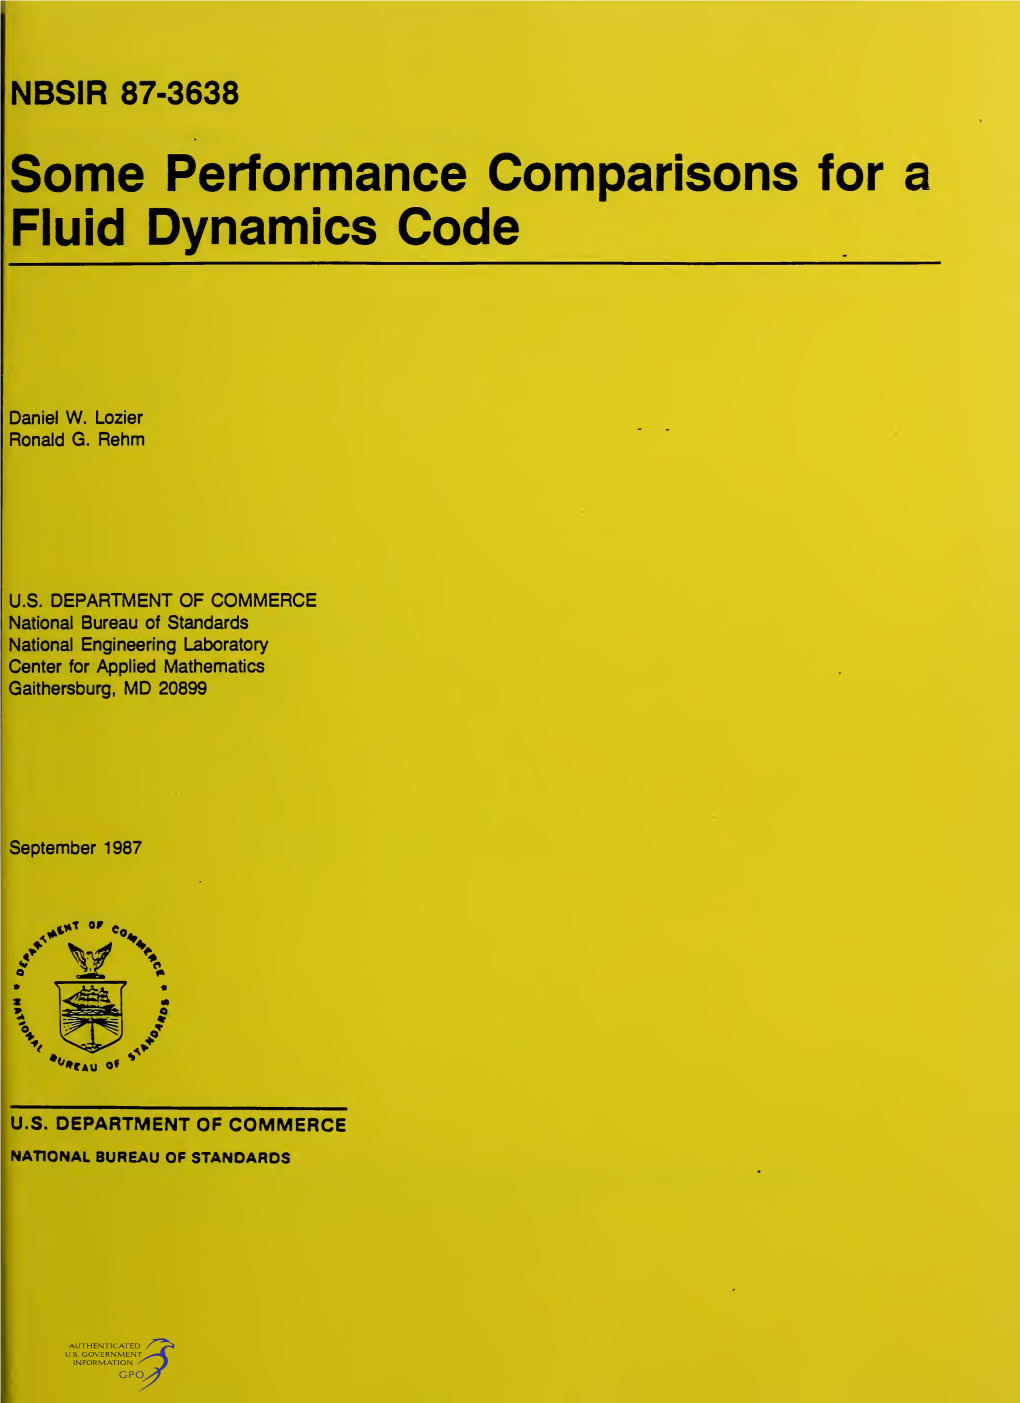 Some Performance Comparisons for a Fluid Dynamics Code